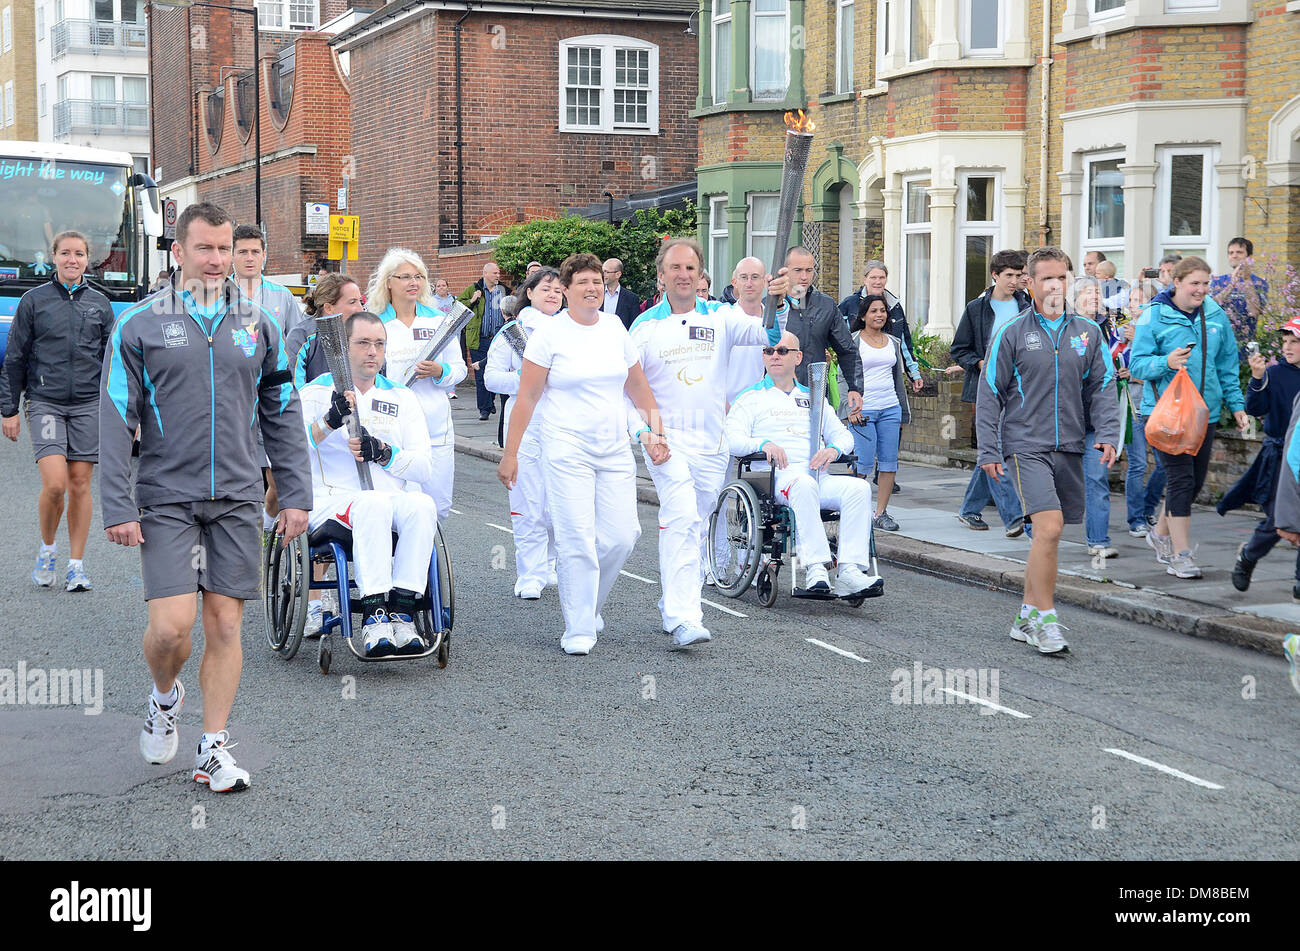 Torchbearers with the Paralympic flame on The Isle Of Dogs. London, England - 29.08.12 Stock Photo